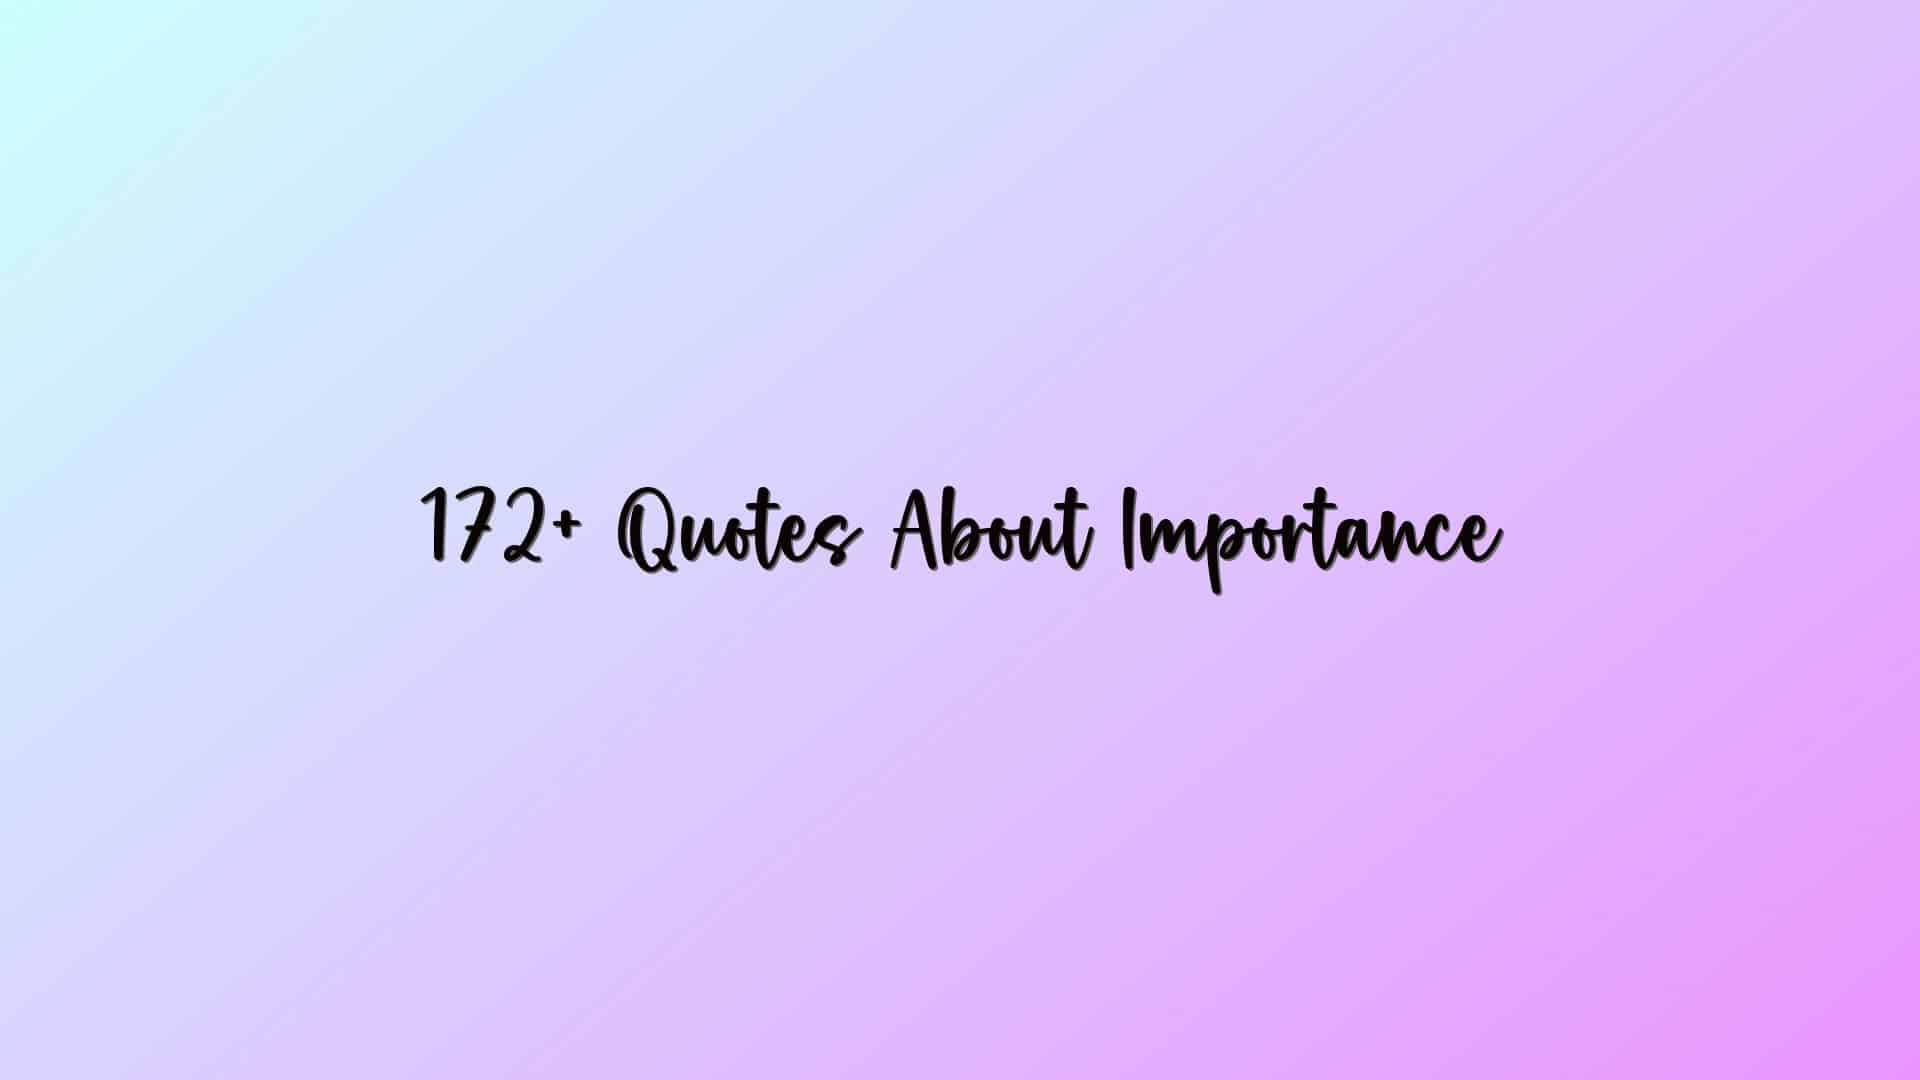 172+ Quotes About Importance